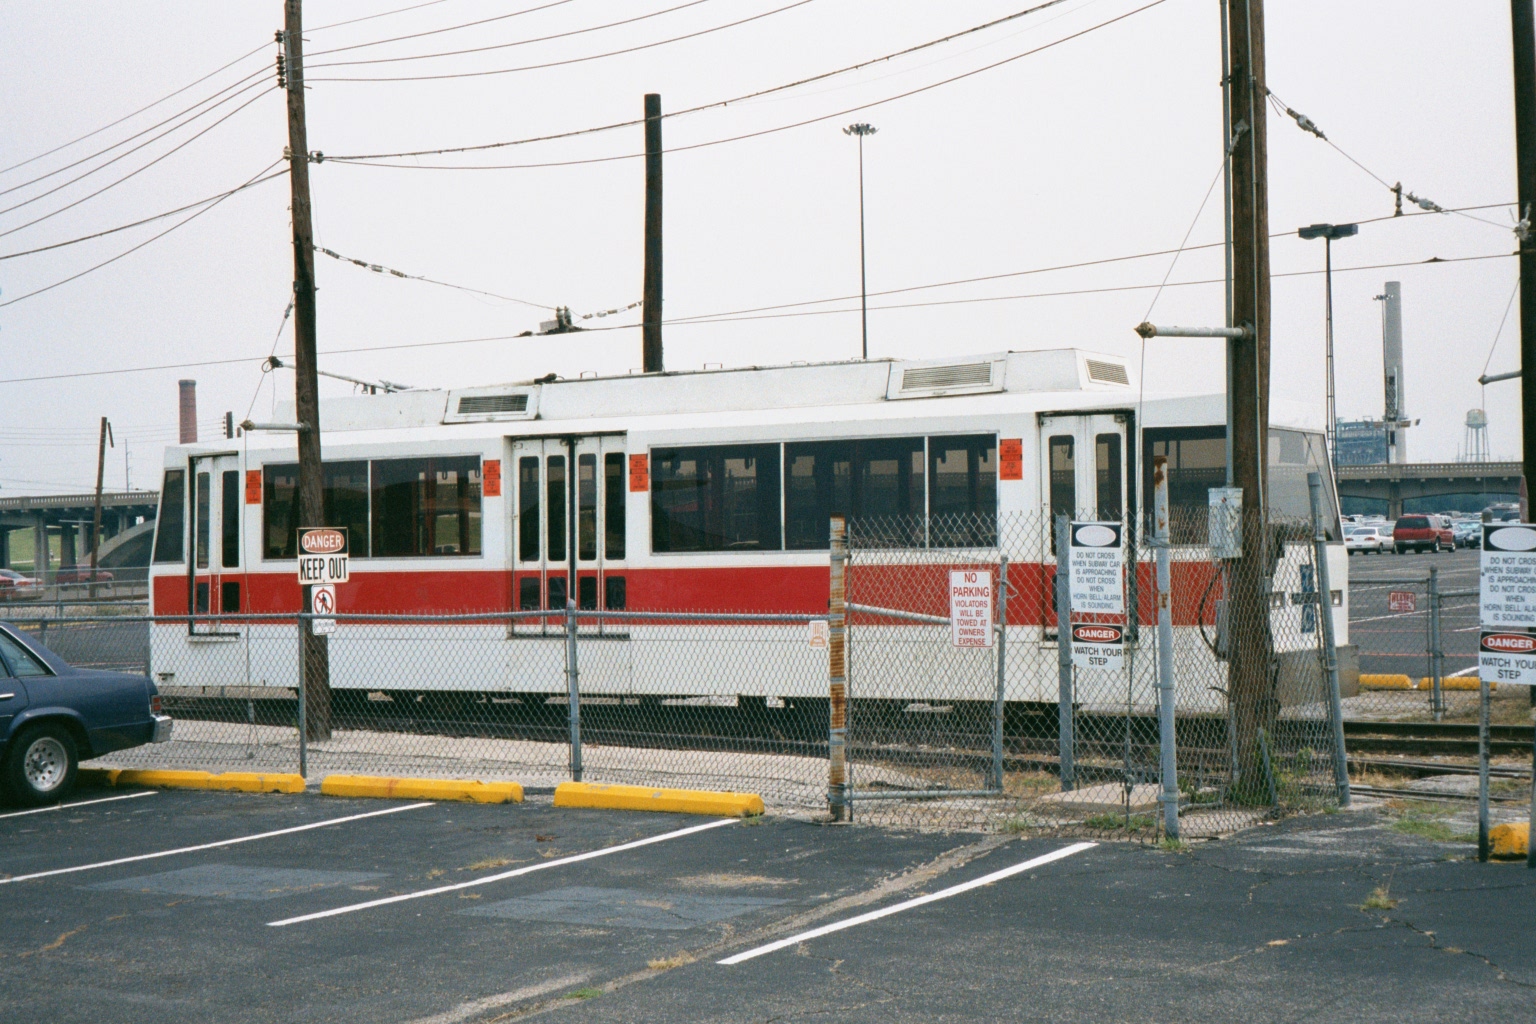 a white and red trolley car sitting in a parking lot